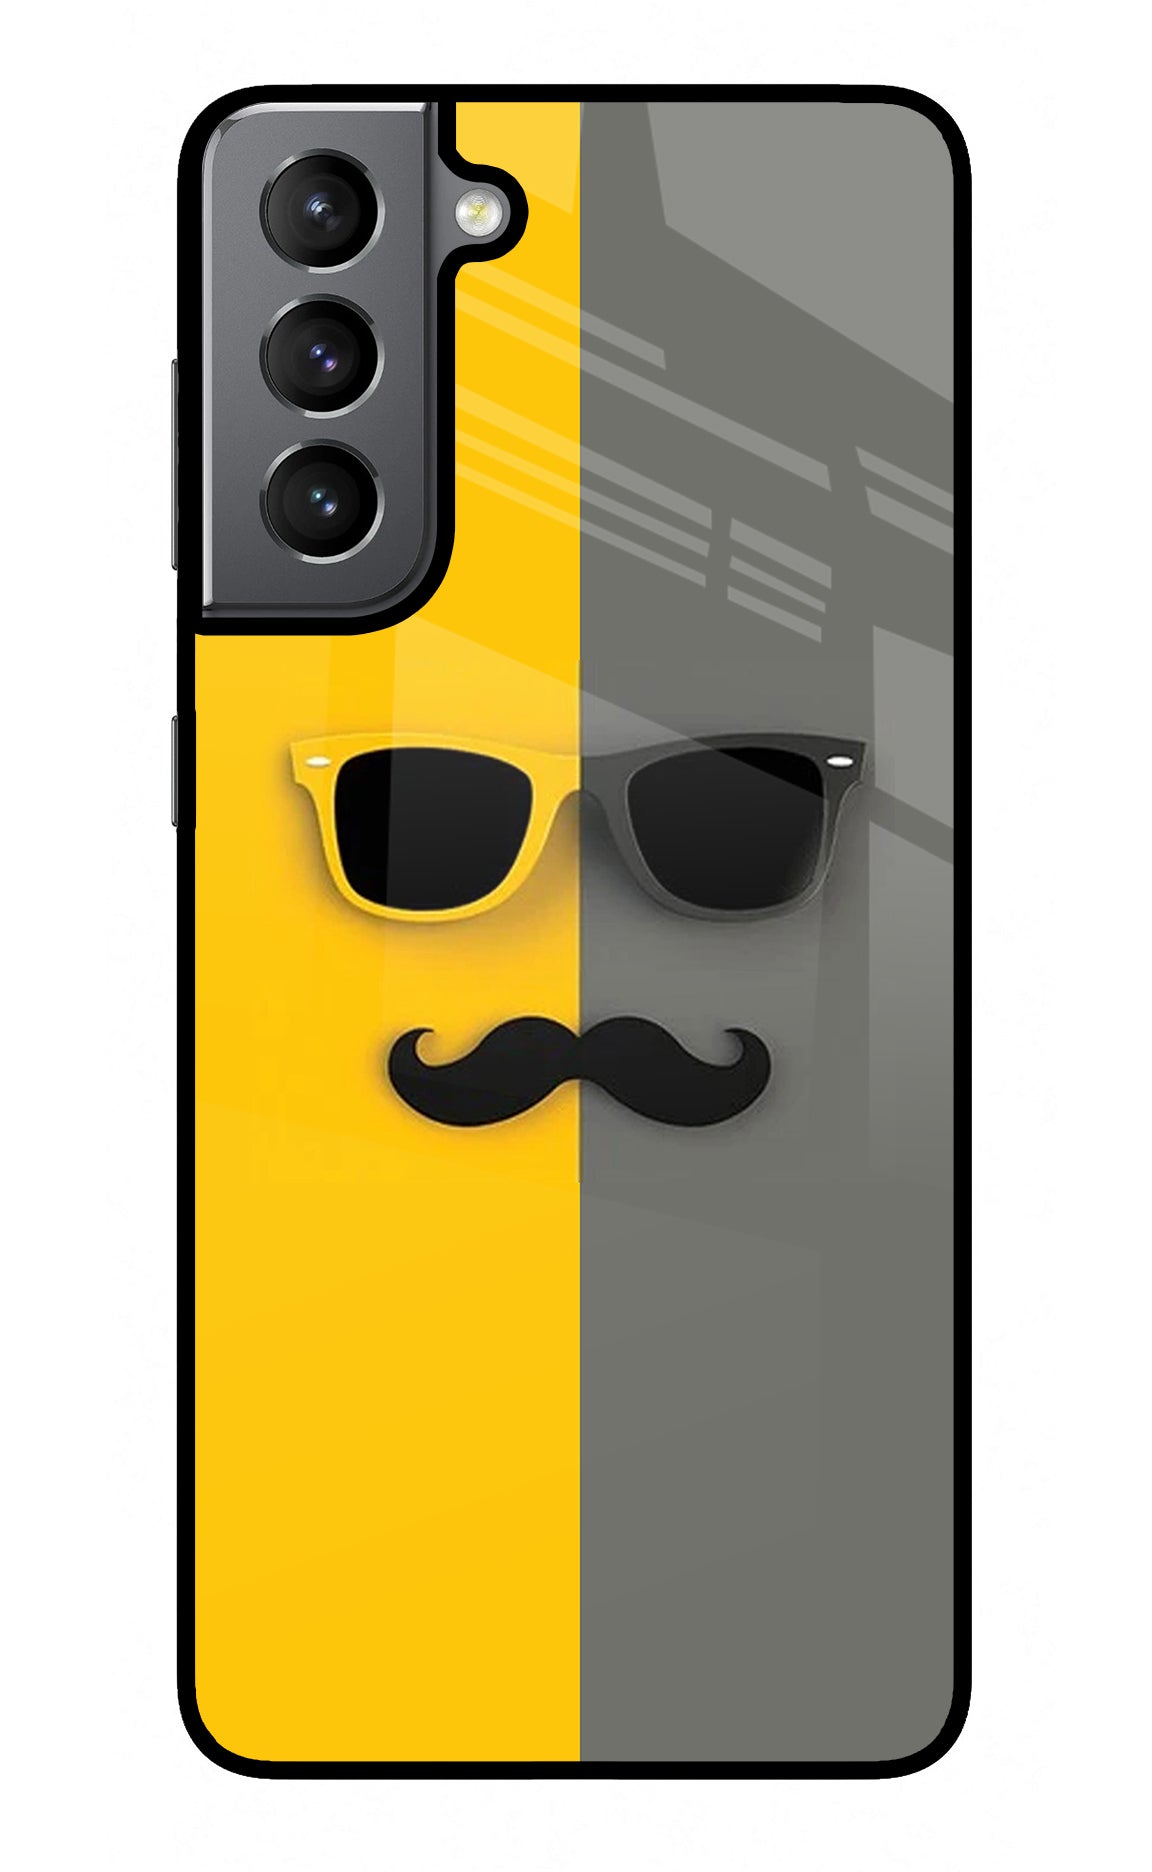 Sunglasses with Mustache Samsung S21 Back Cover